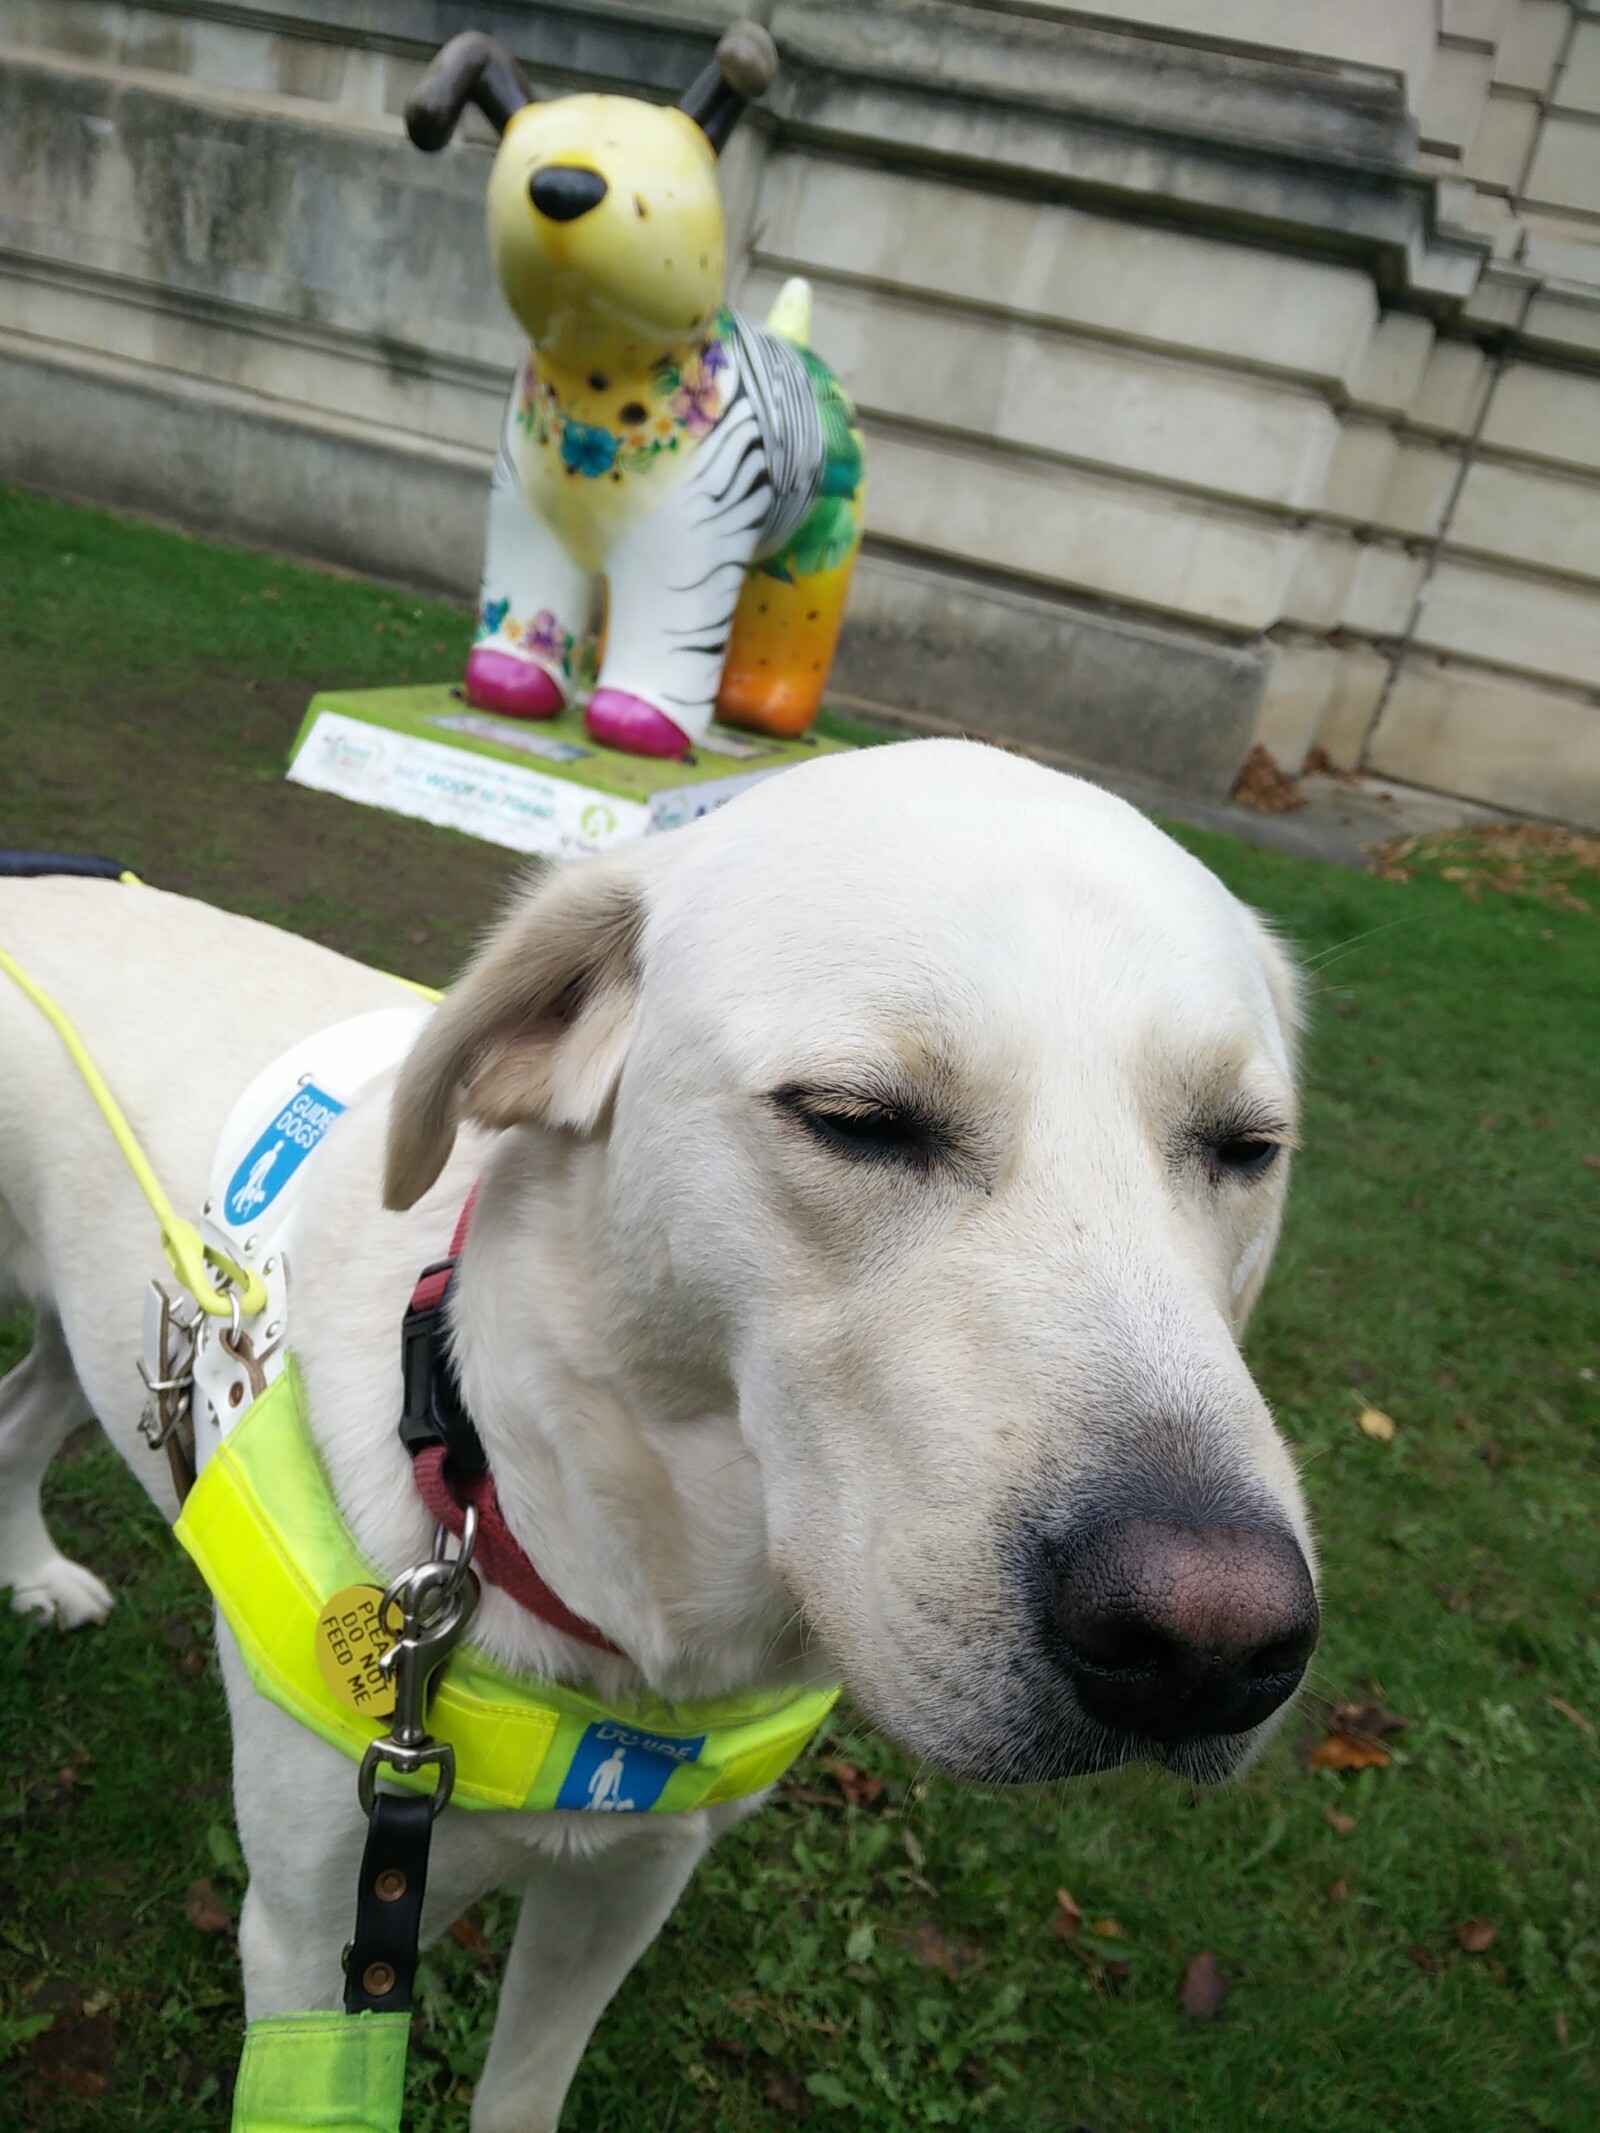 Guide Dog Uri with a Snowdog in the background, outside National Museum Cardiff